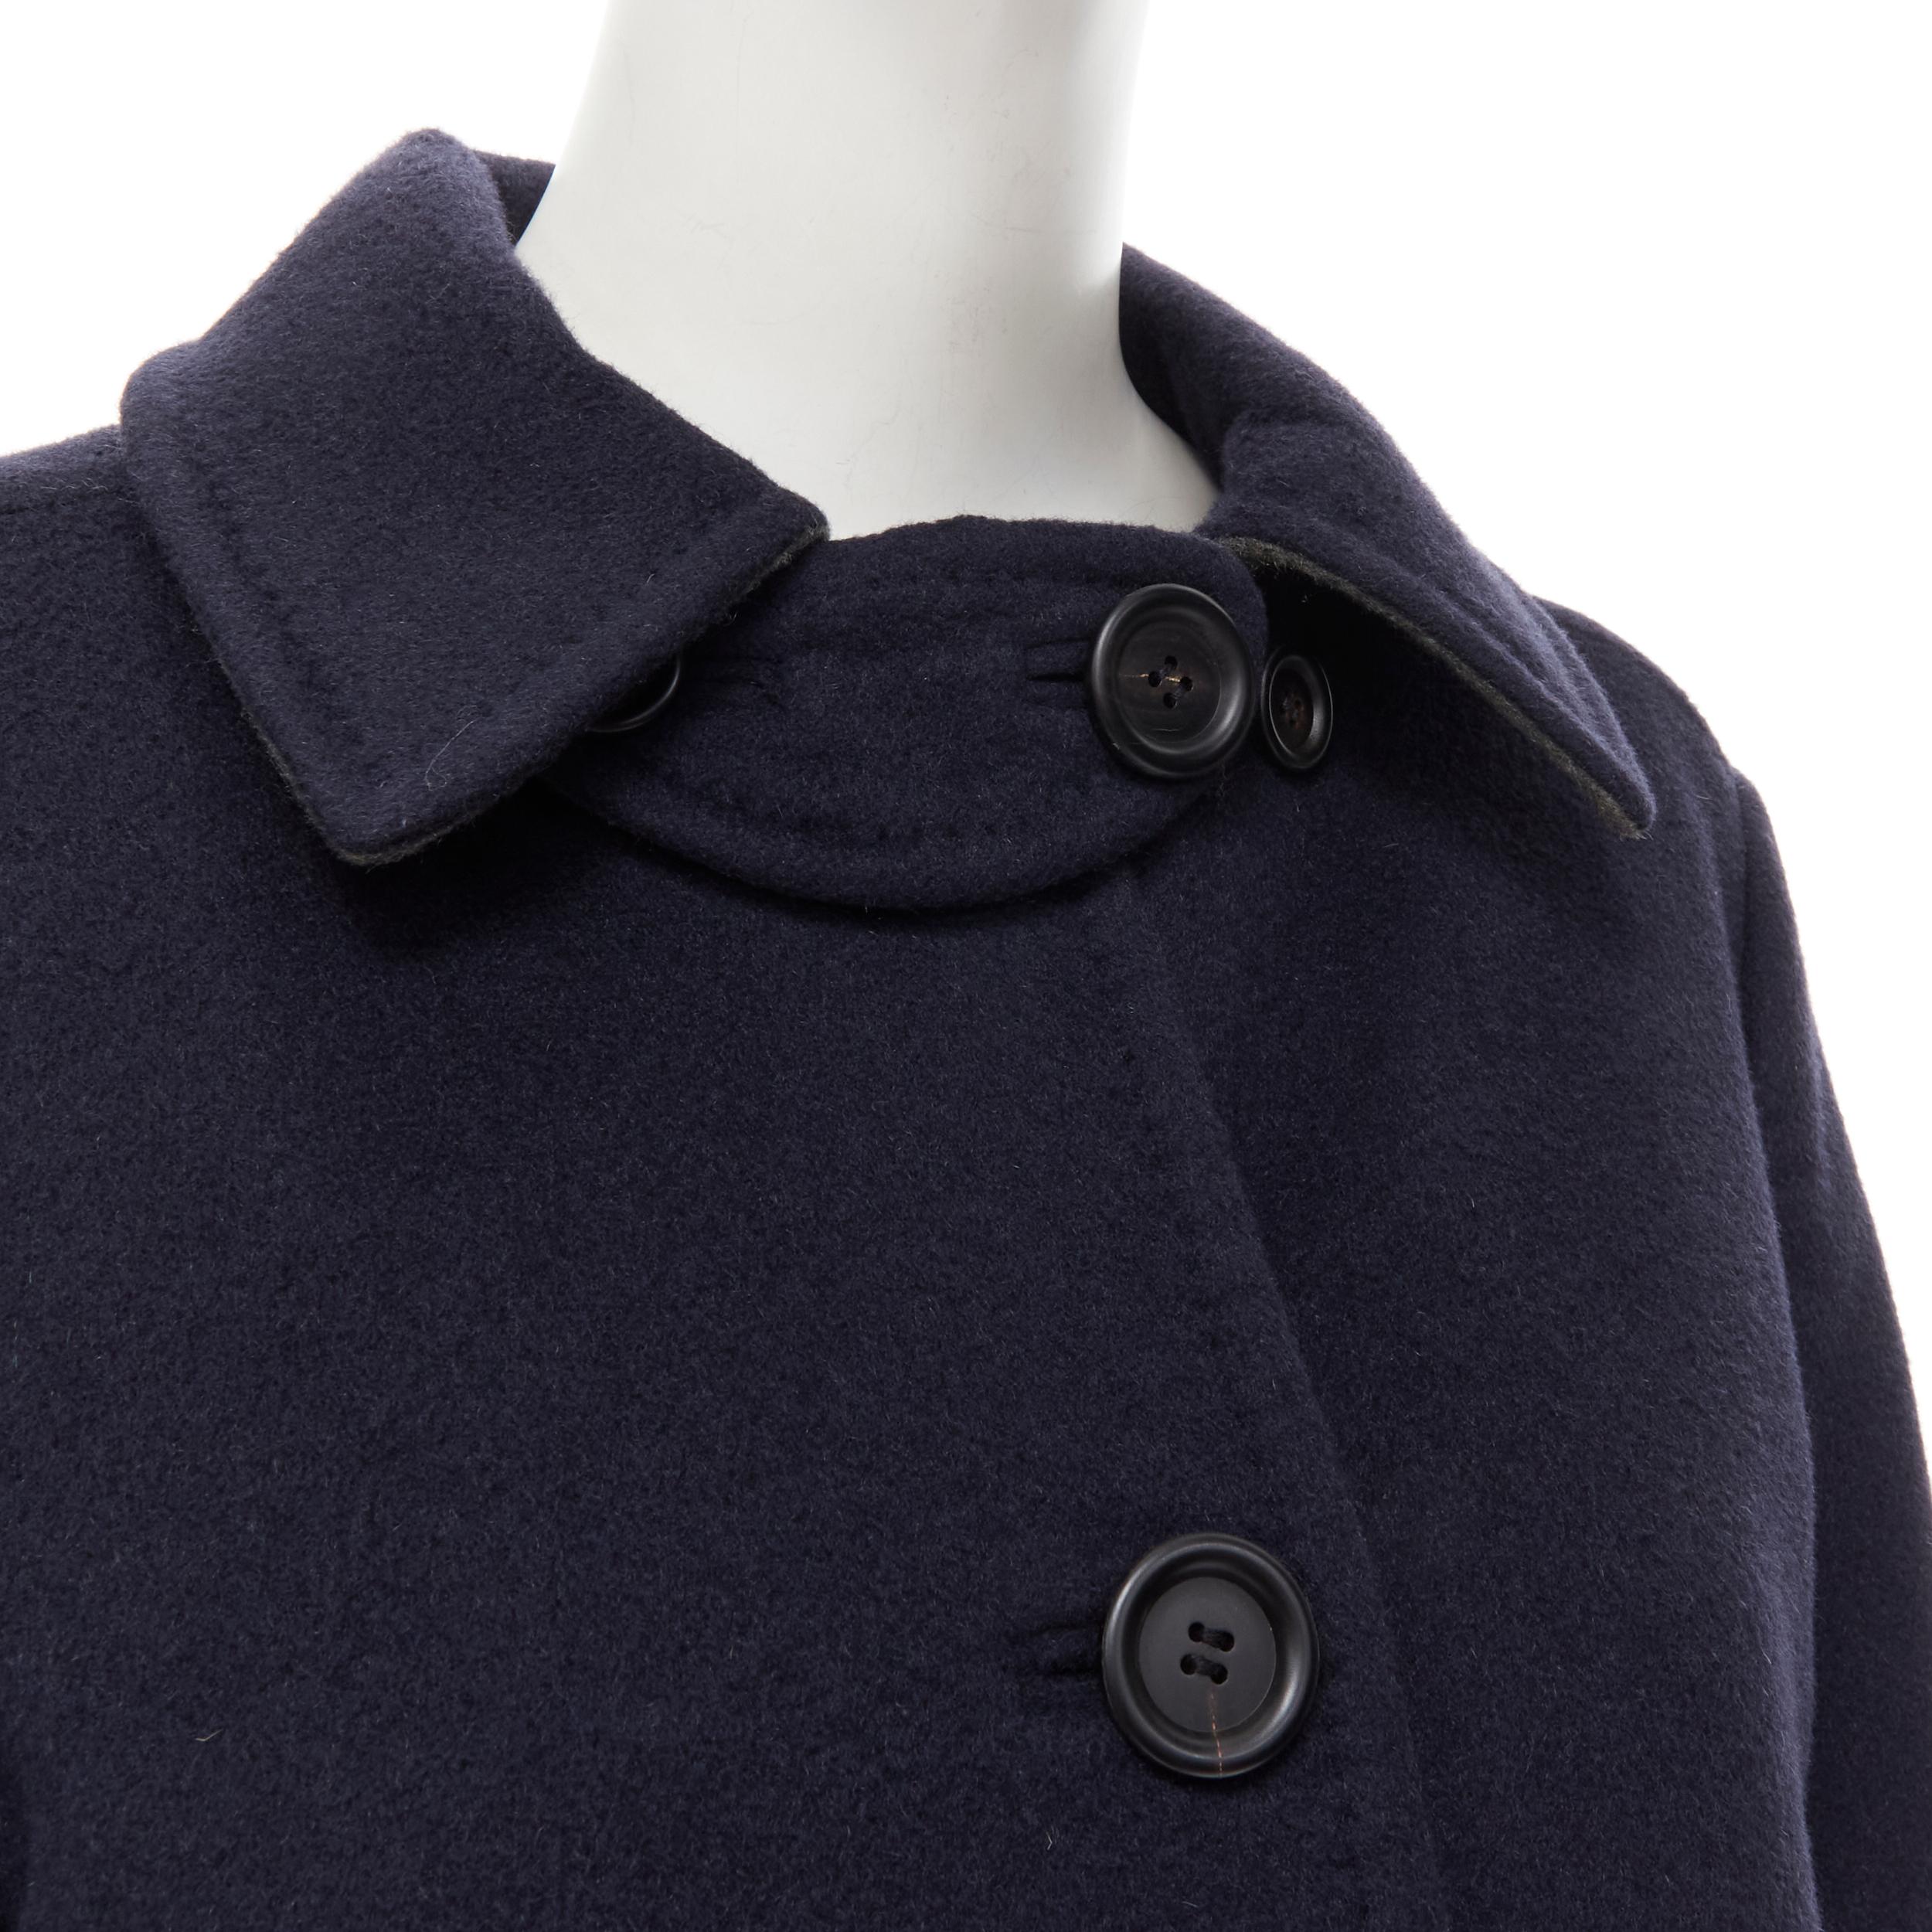 LORO PIANA 100% double face cashmere navy grey cashmere coat IT44 M 
Reference: TGAS/B01833 
Brand: Loro Piana 
Material: Cashmere 
Color: Navy 
Pattern: Solid 
Closure: Button 
Extra Detail: 100% double face cashmere. Black resin button. Spread